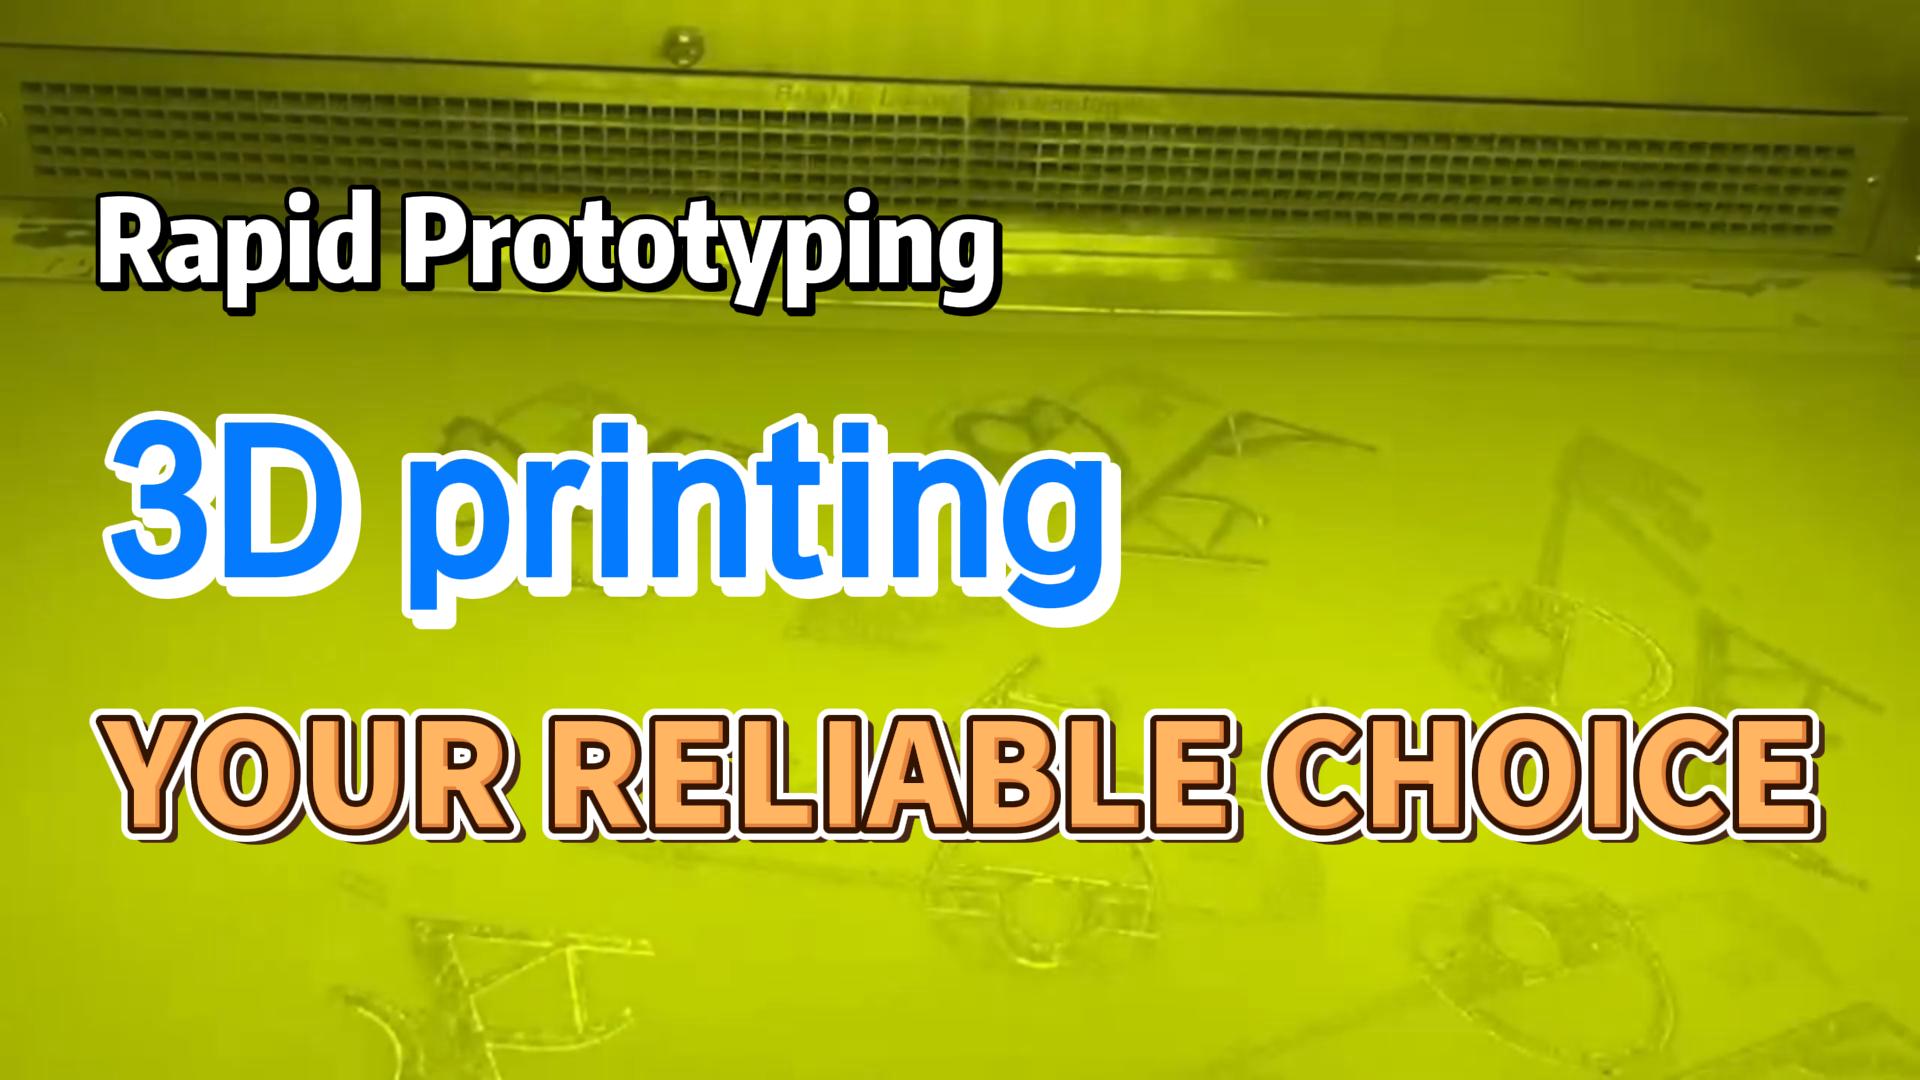 What is rapid prototyping or 3D printing?